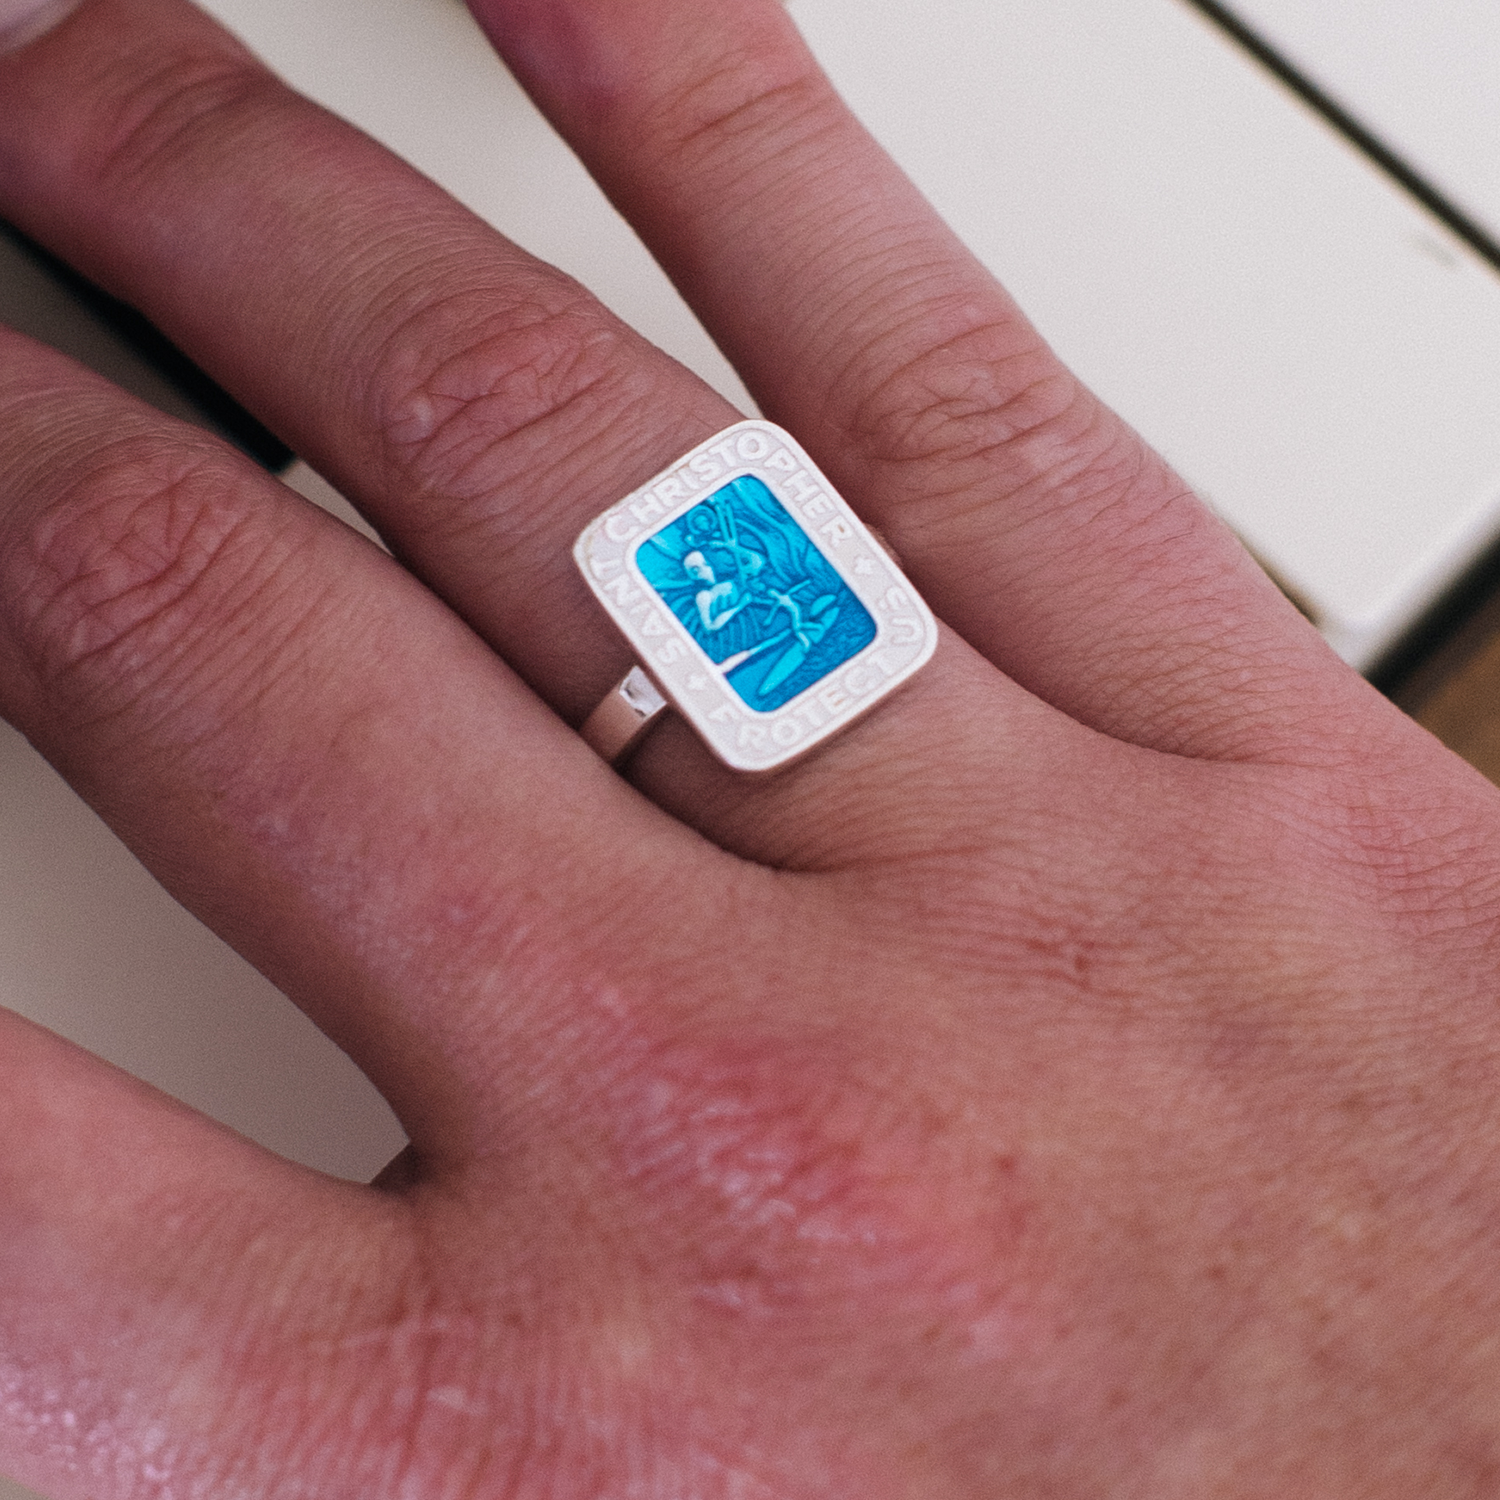 St. Christopher Rectangle Ring - Aqua / White – Get Back Necklaces